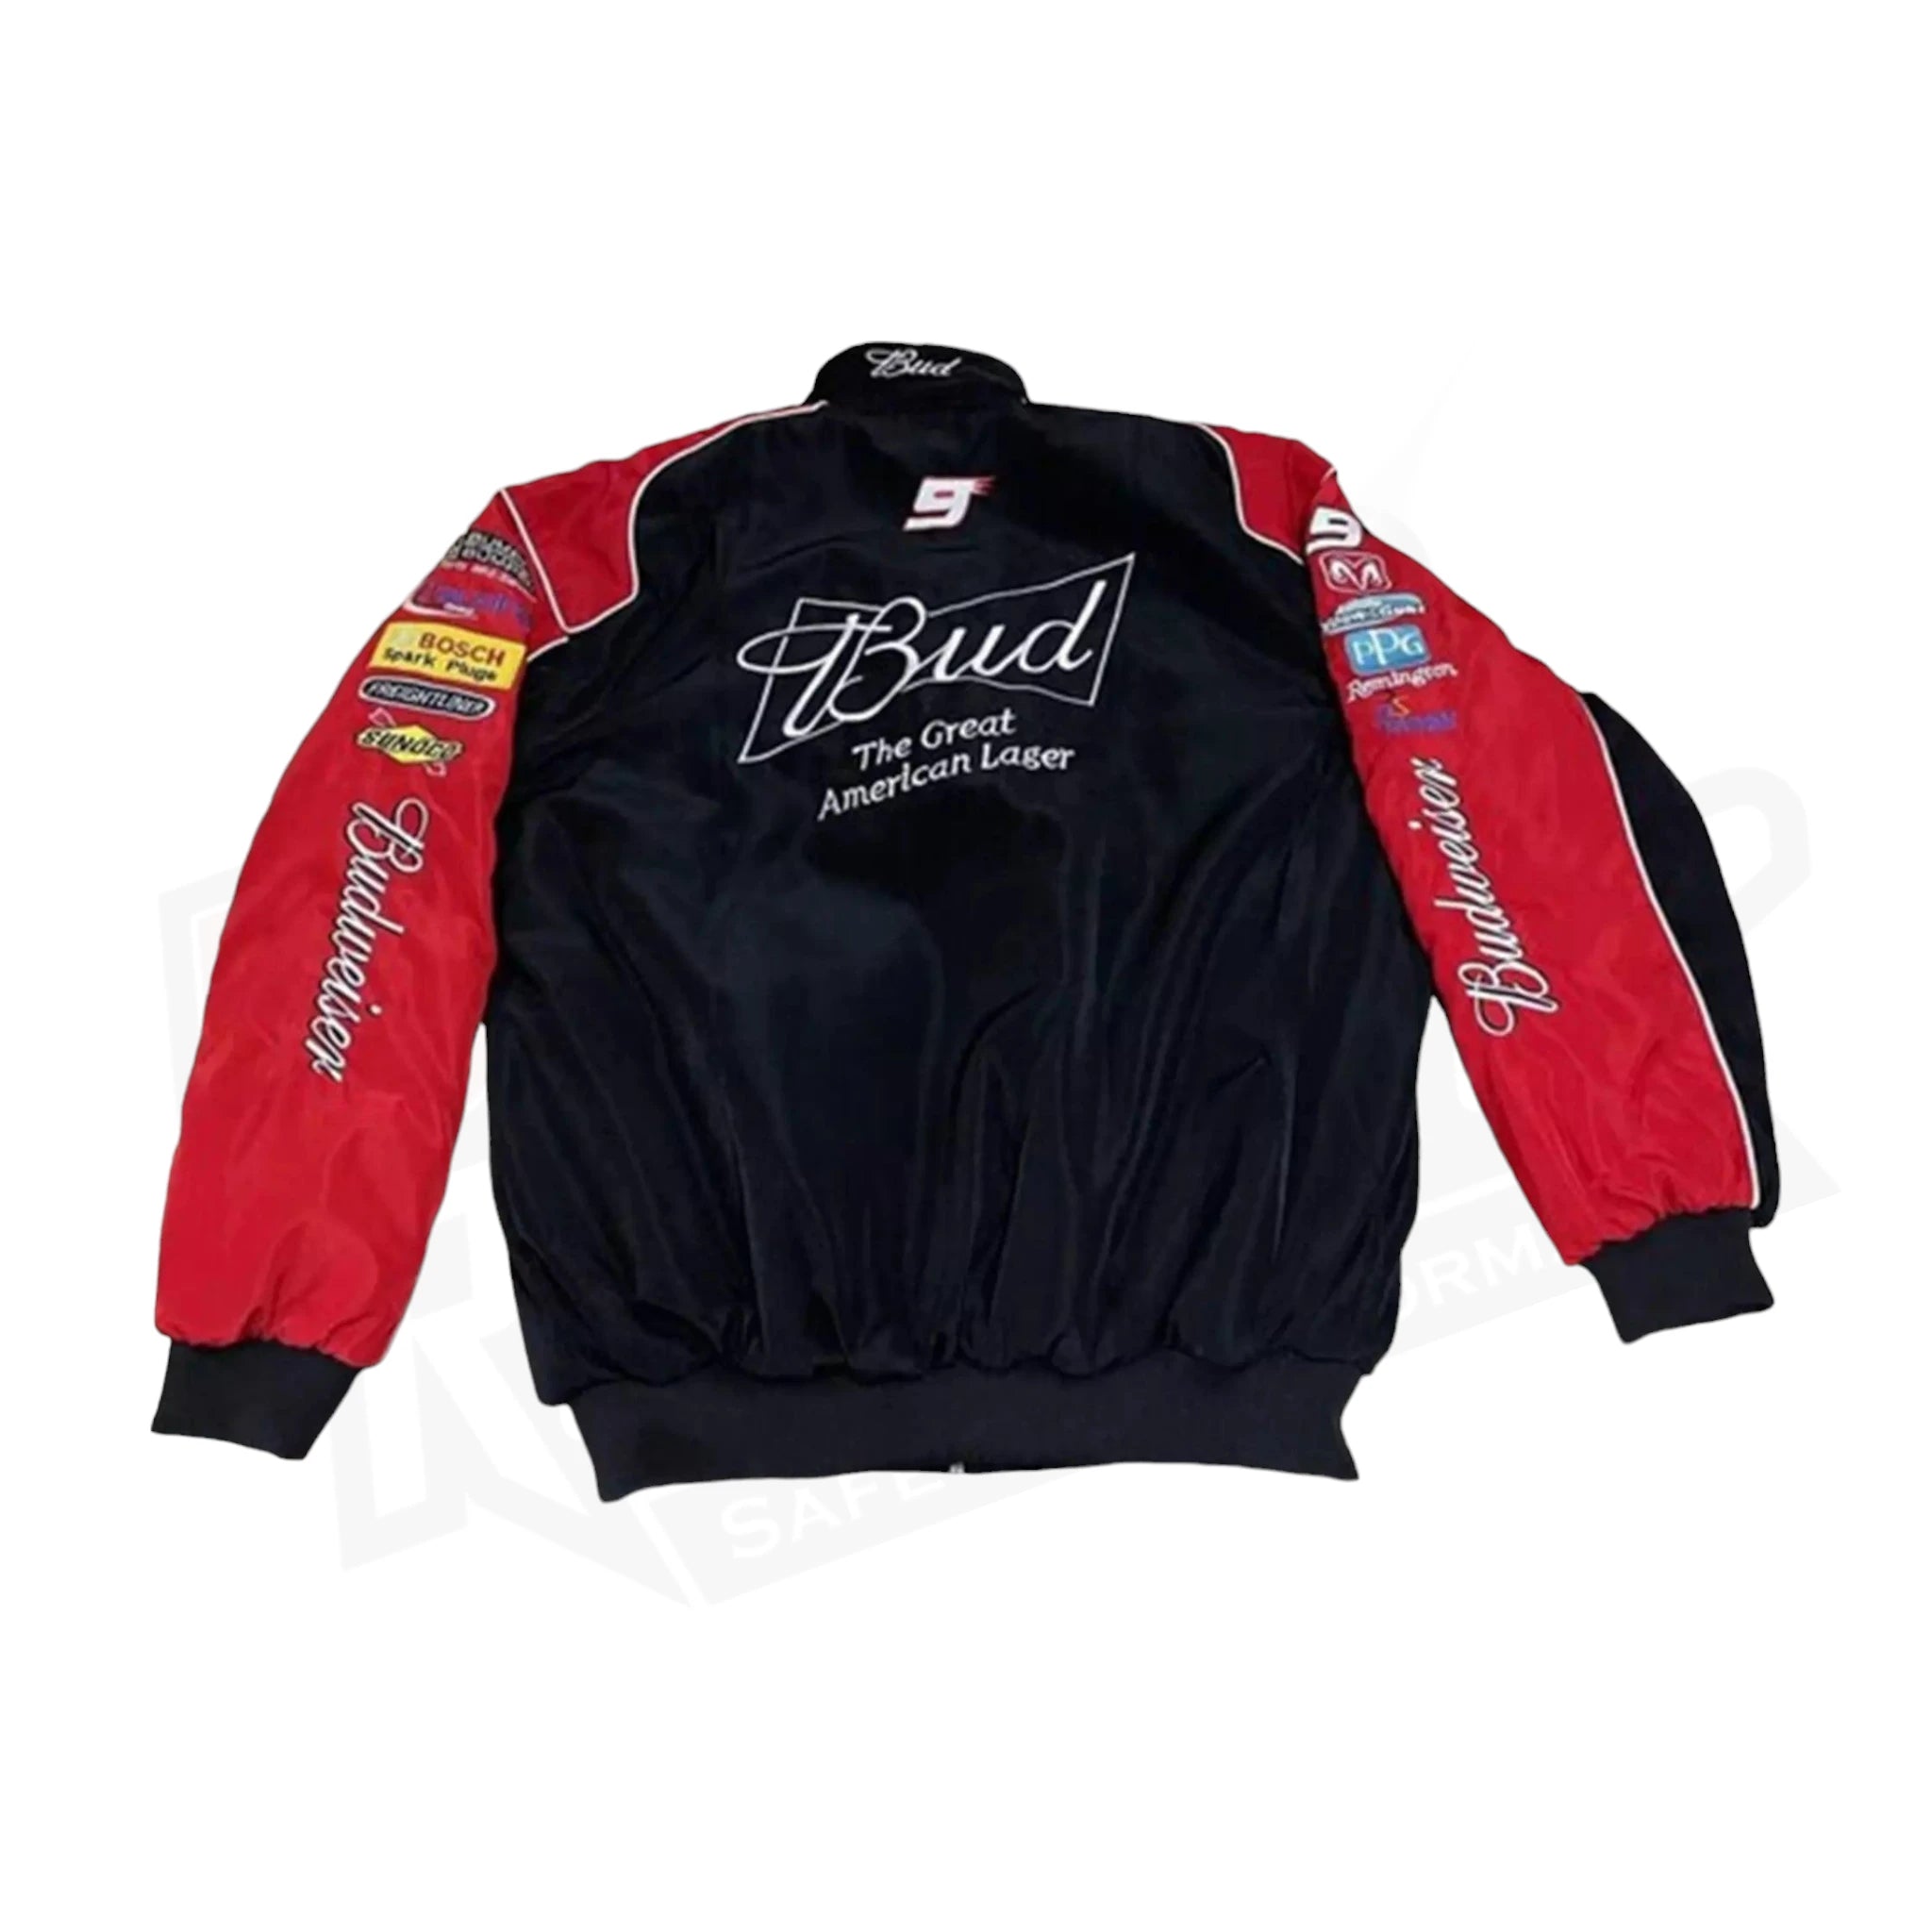 Budweiser F1 Racing Embroidered Retro Limited Edition Jacket Dash Racegear